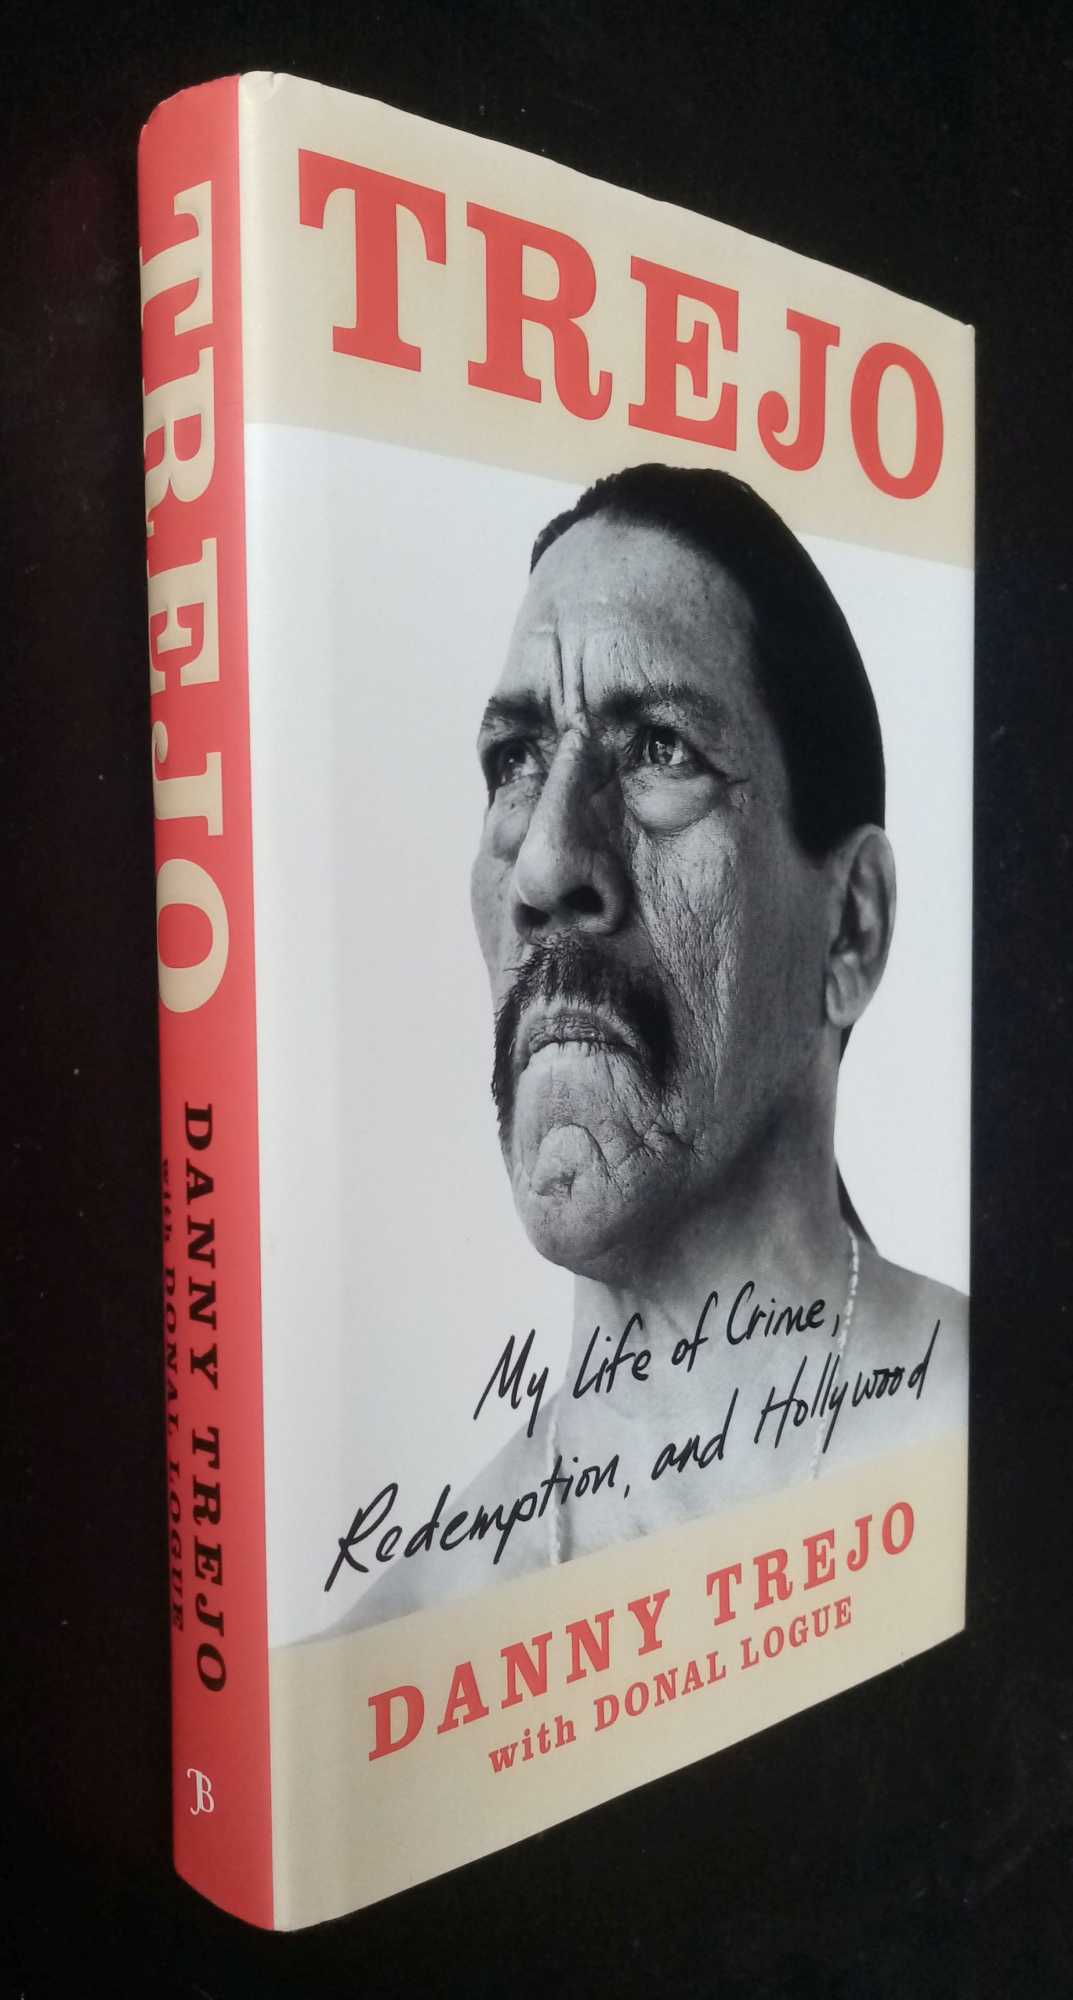 Danny Trejo - Trejo: My Life of Crime, Redemption and Hollywood